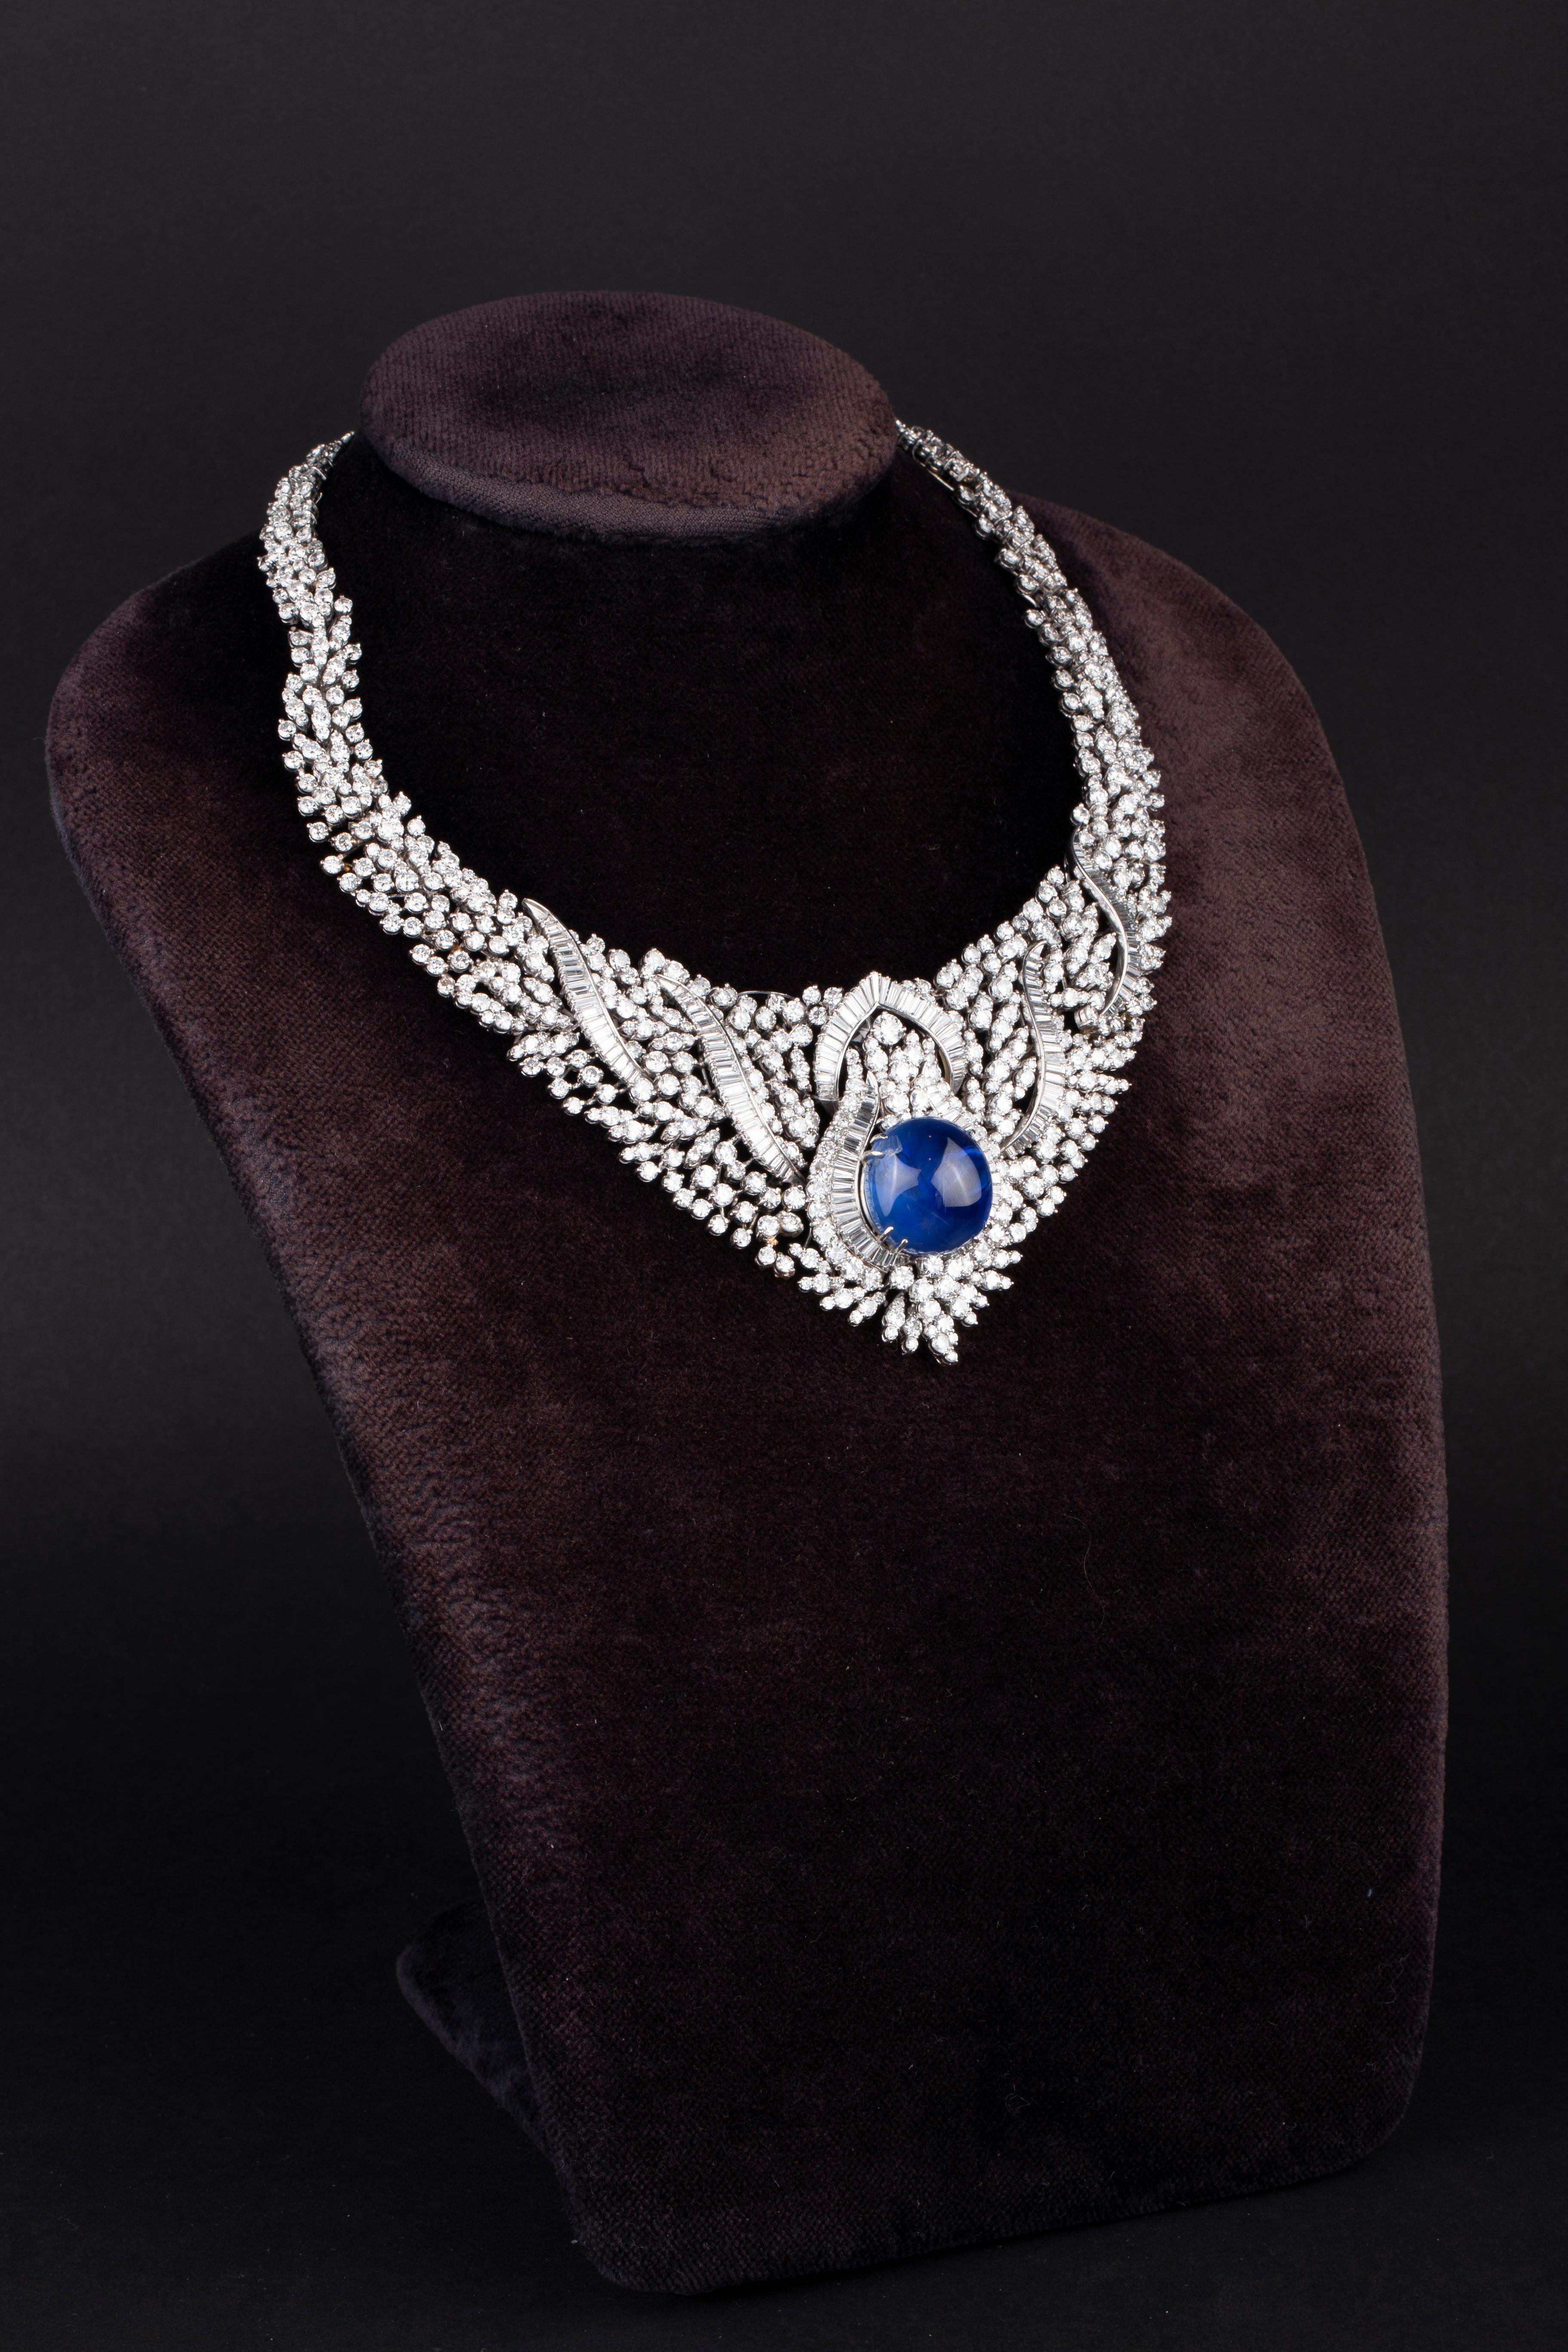 A stunning bib necklace in white gold centering a 39.4 carat blue cabochon sapphire framed by 50 carats of round brilliant and emerald cut diamonds. Vers les années 1950.